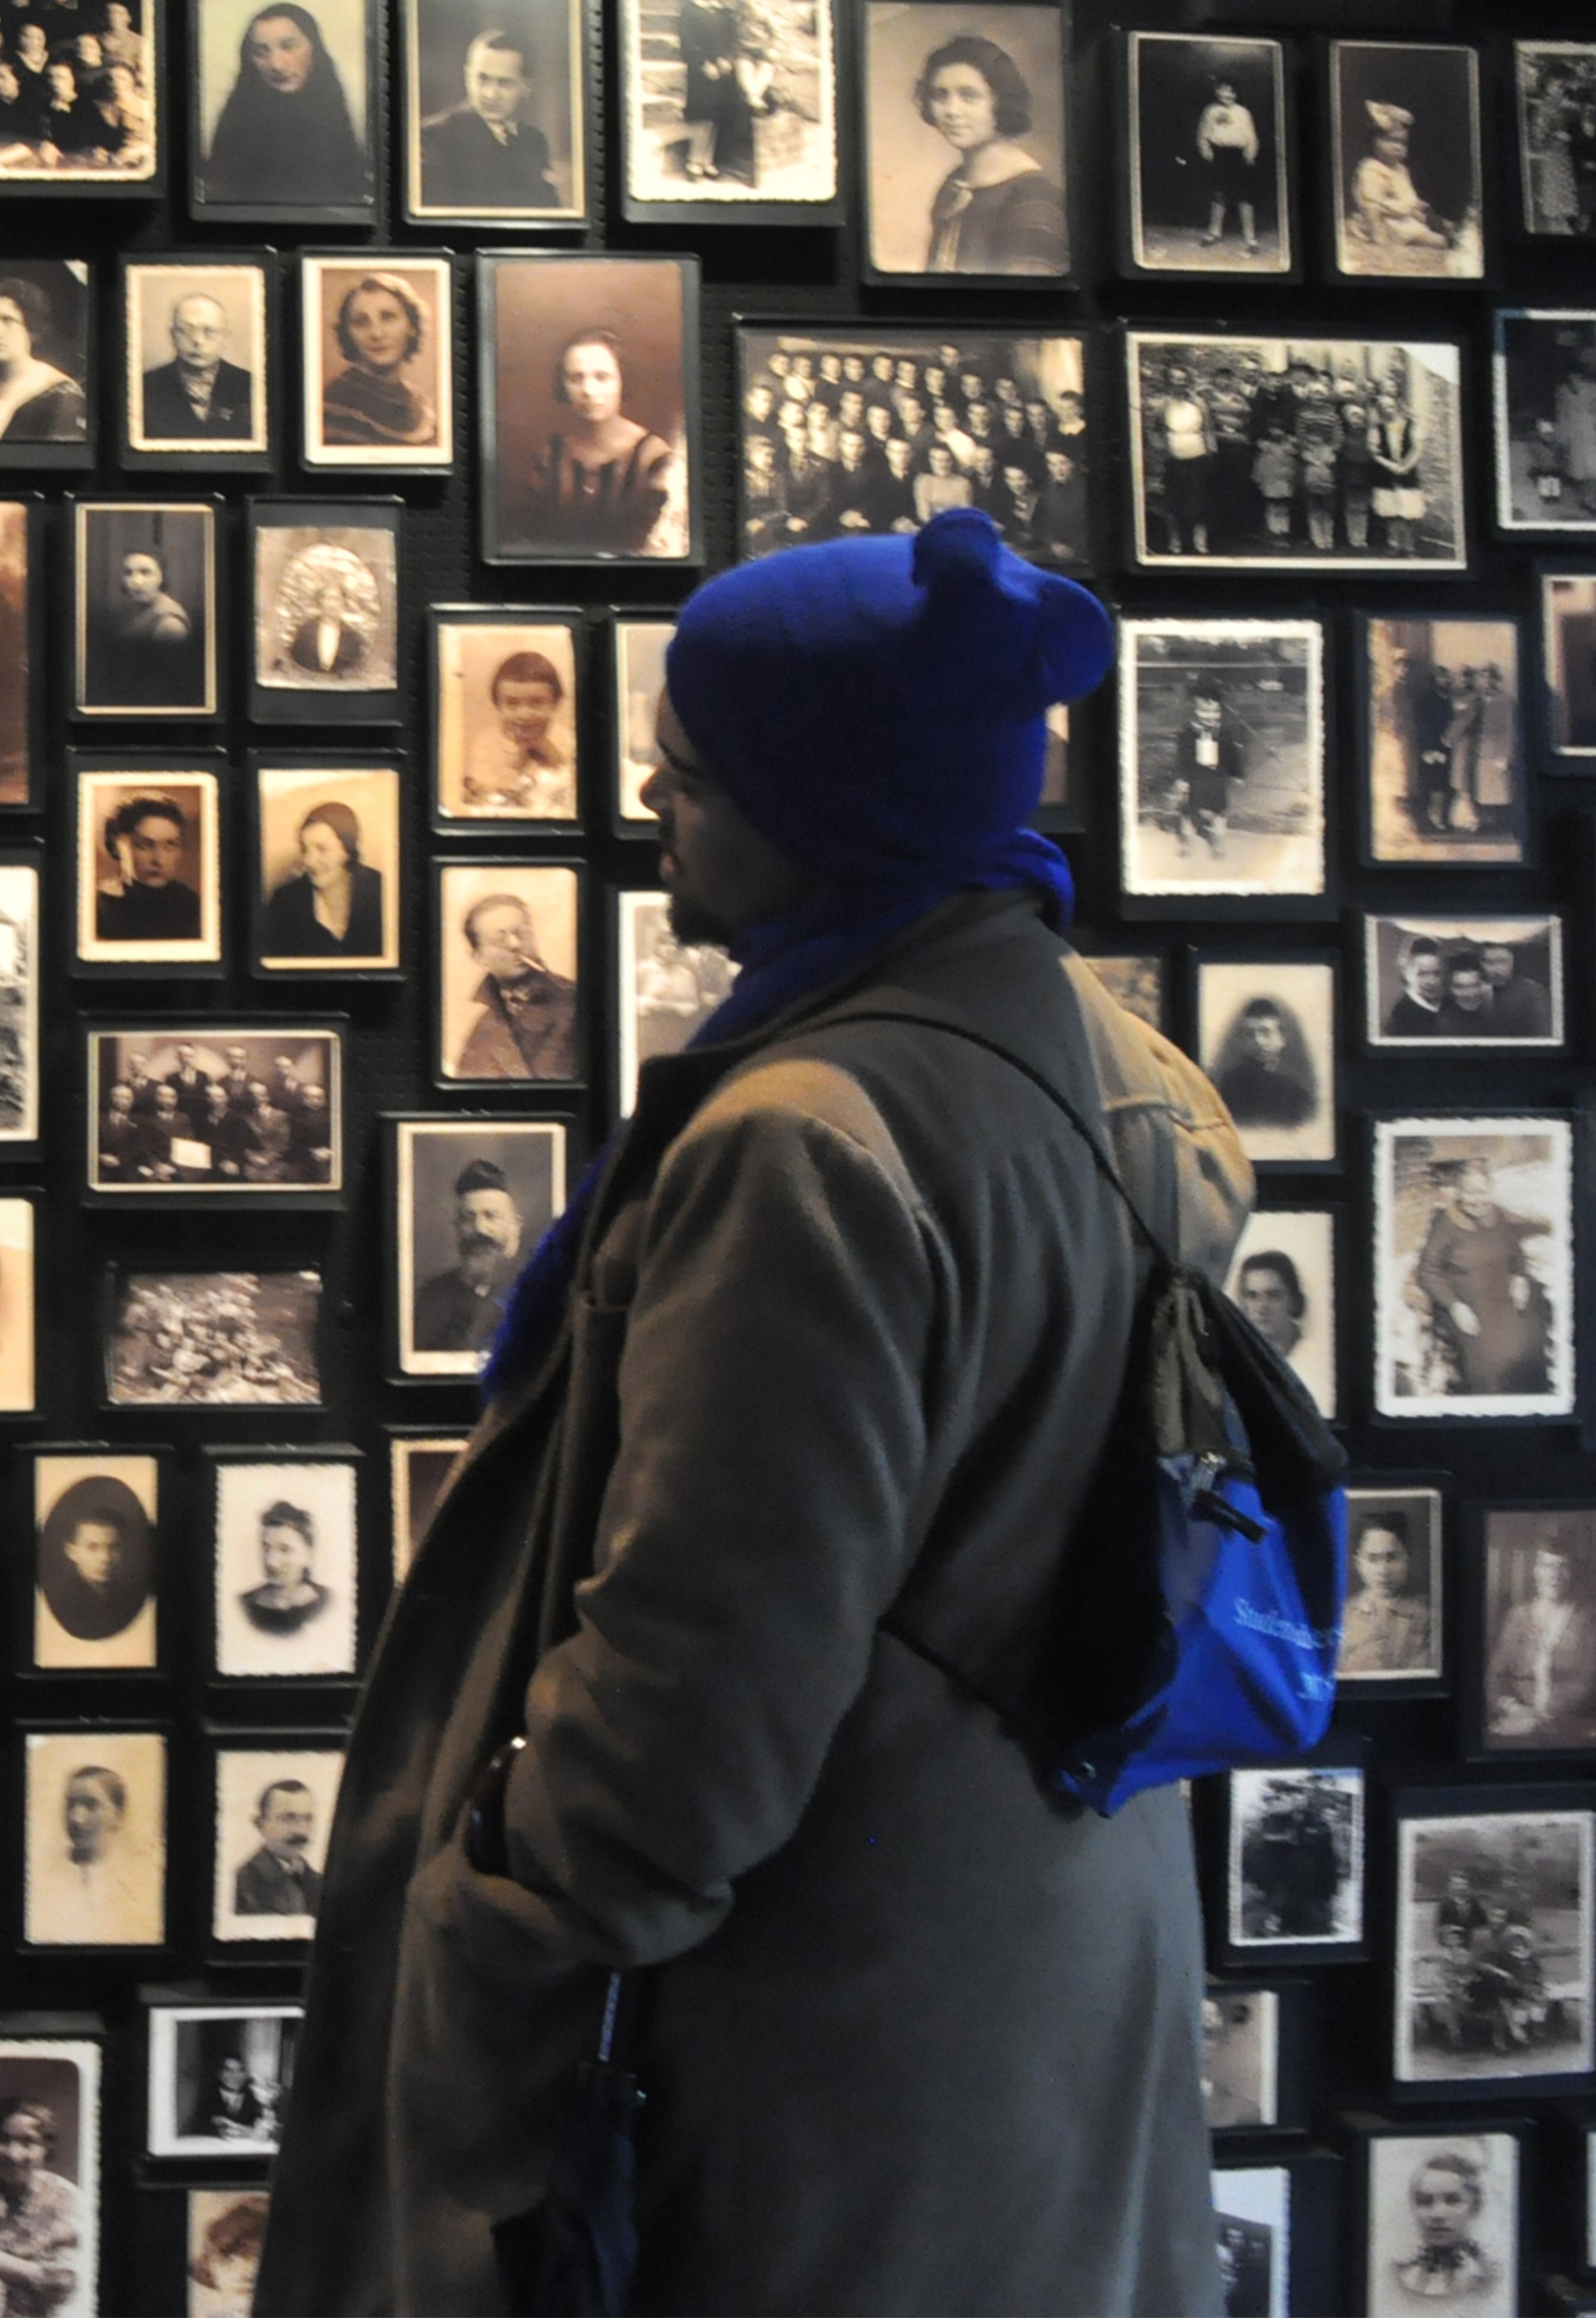 Shannon-Cupido-looking-at-pre-Holocaust-images-of-people-imprisoned-and-murdered-at-Auschwitz-Birkenau_resize